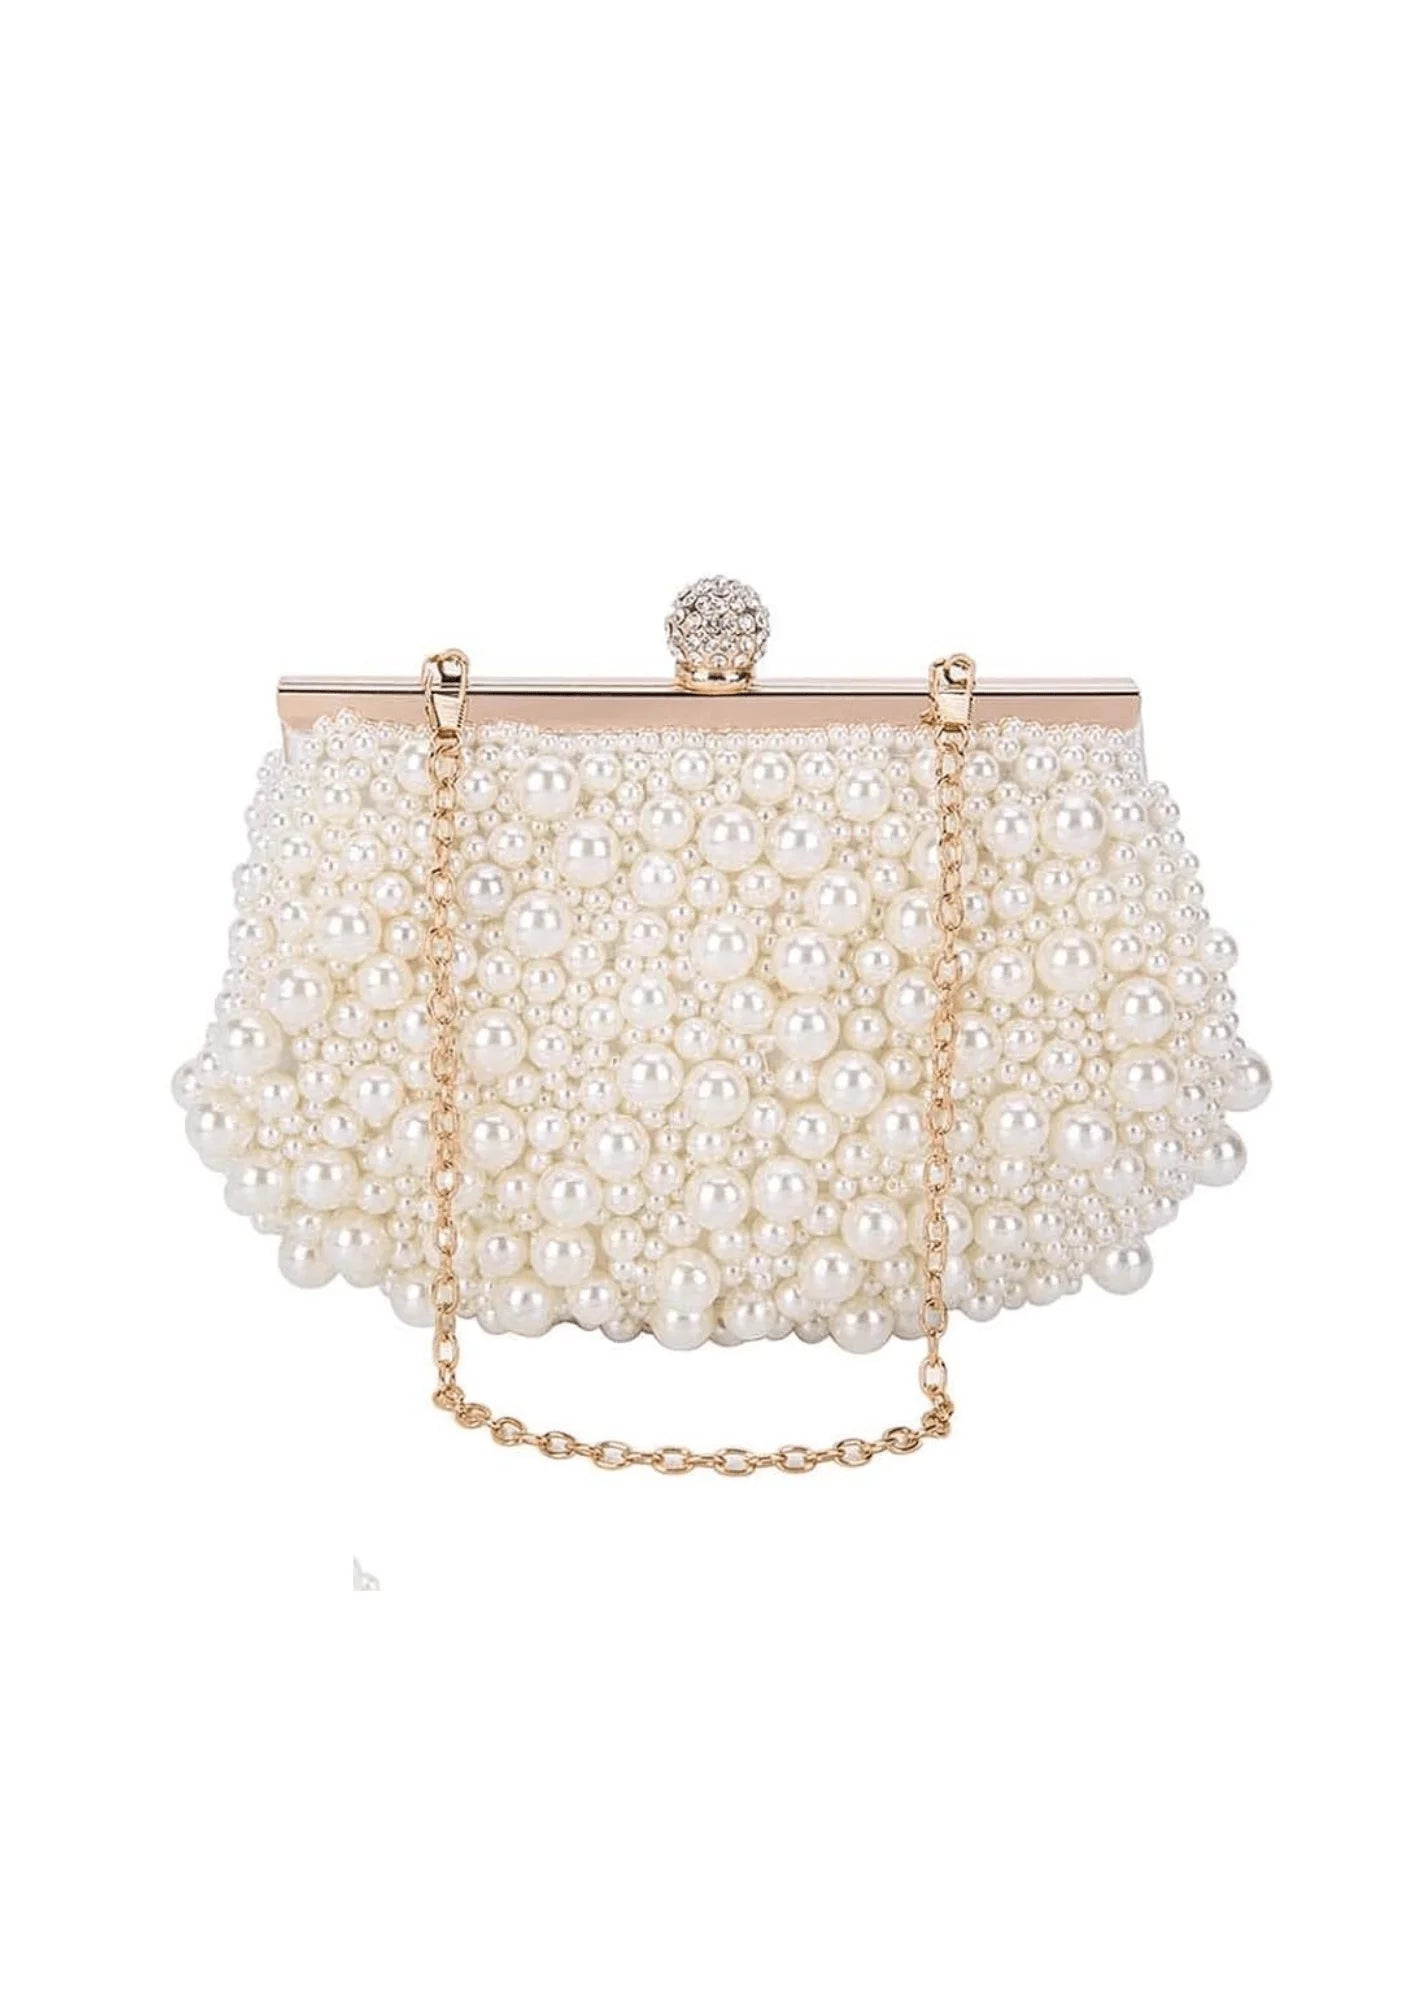 OFF WHITE BEADED CLUTCH